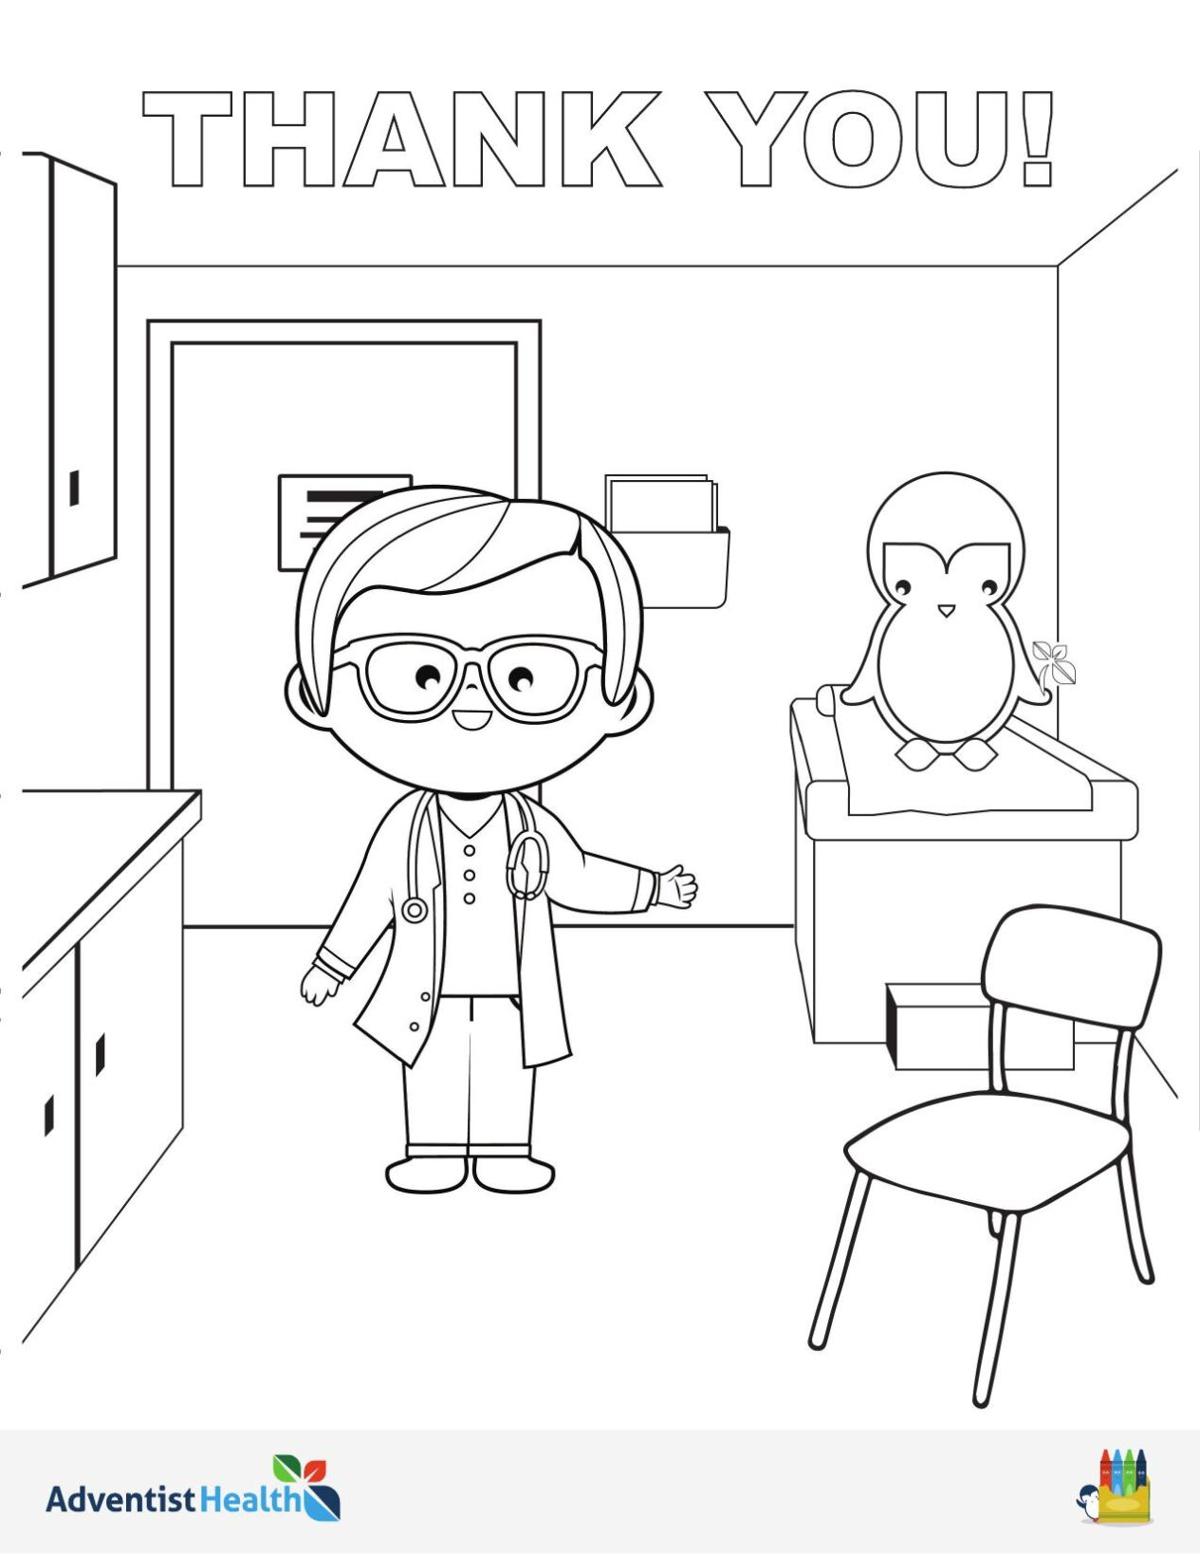 widget coloring pages